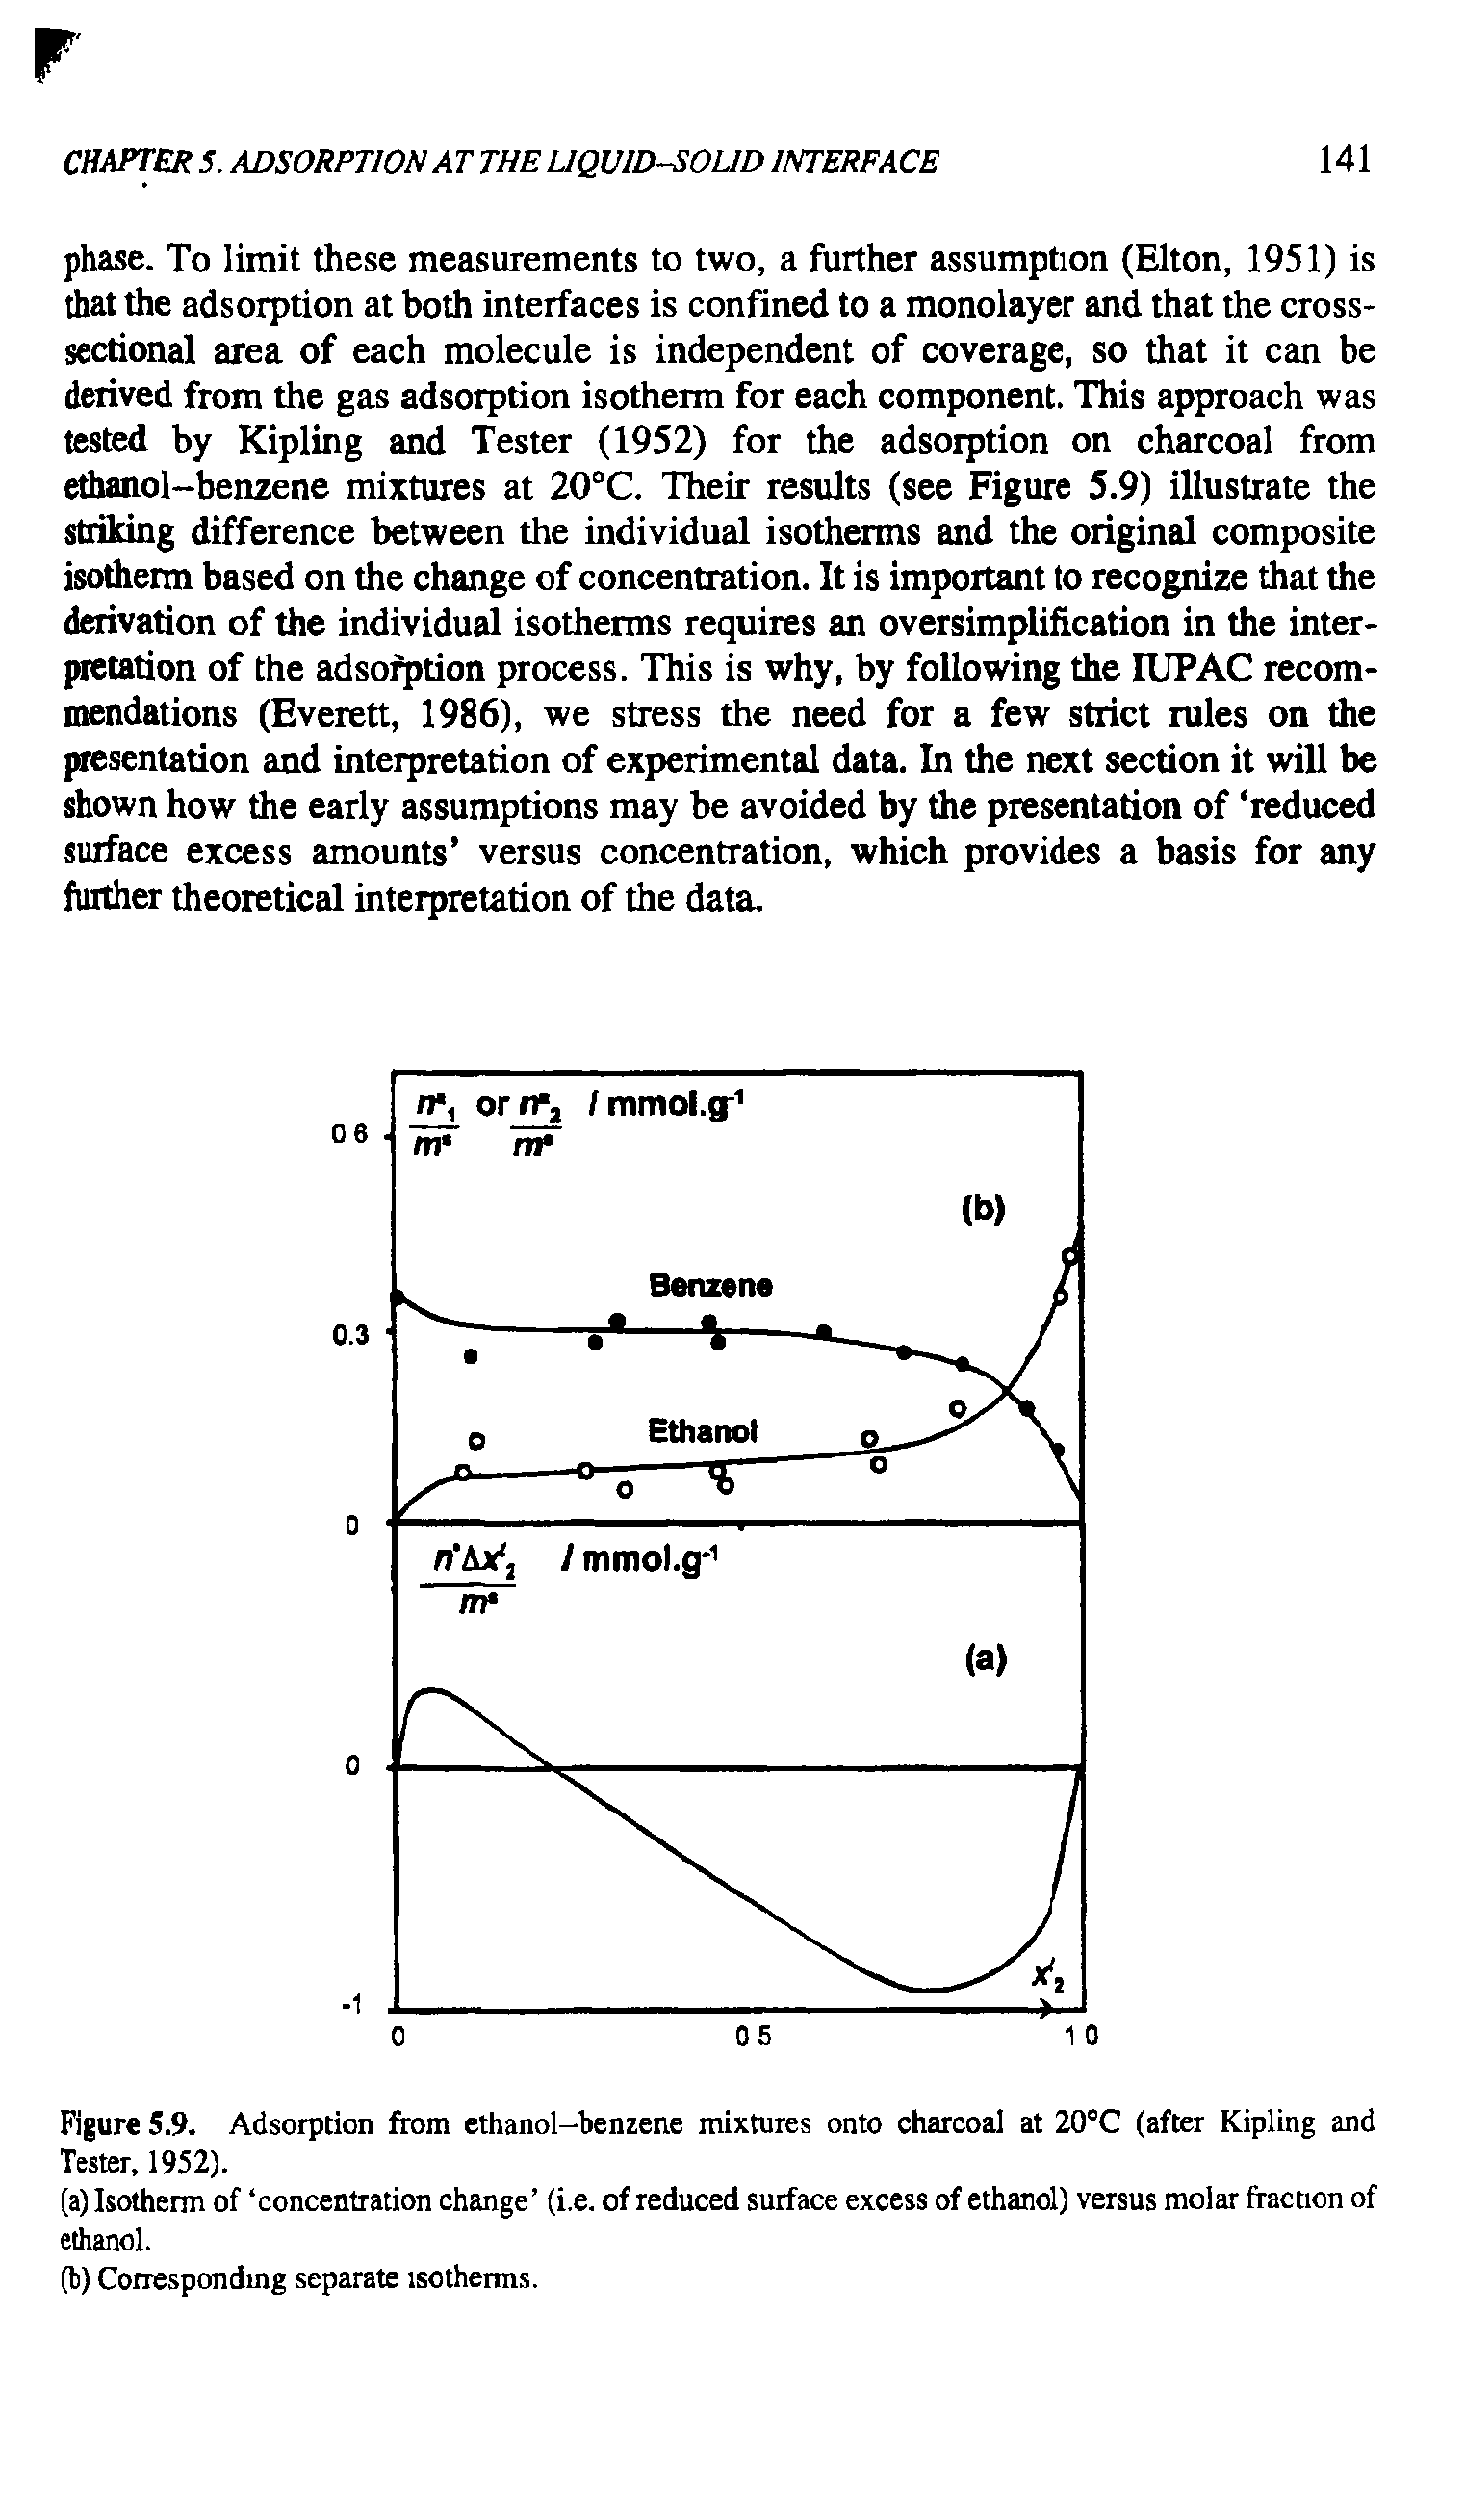 Figure 5.9. Adsorption from ethanol-benzene mixtures onto charcoal at 20°C (after Kipling and Tester, 1952).